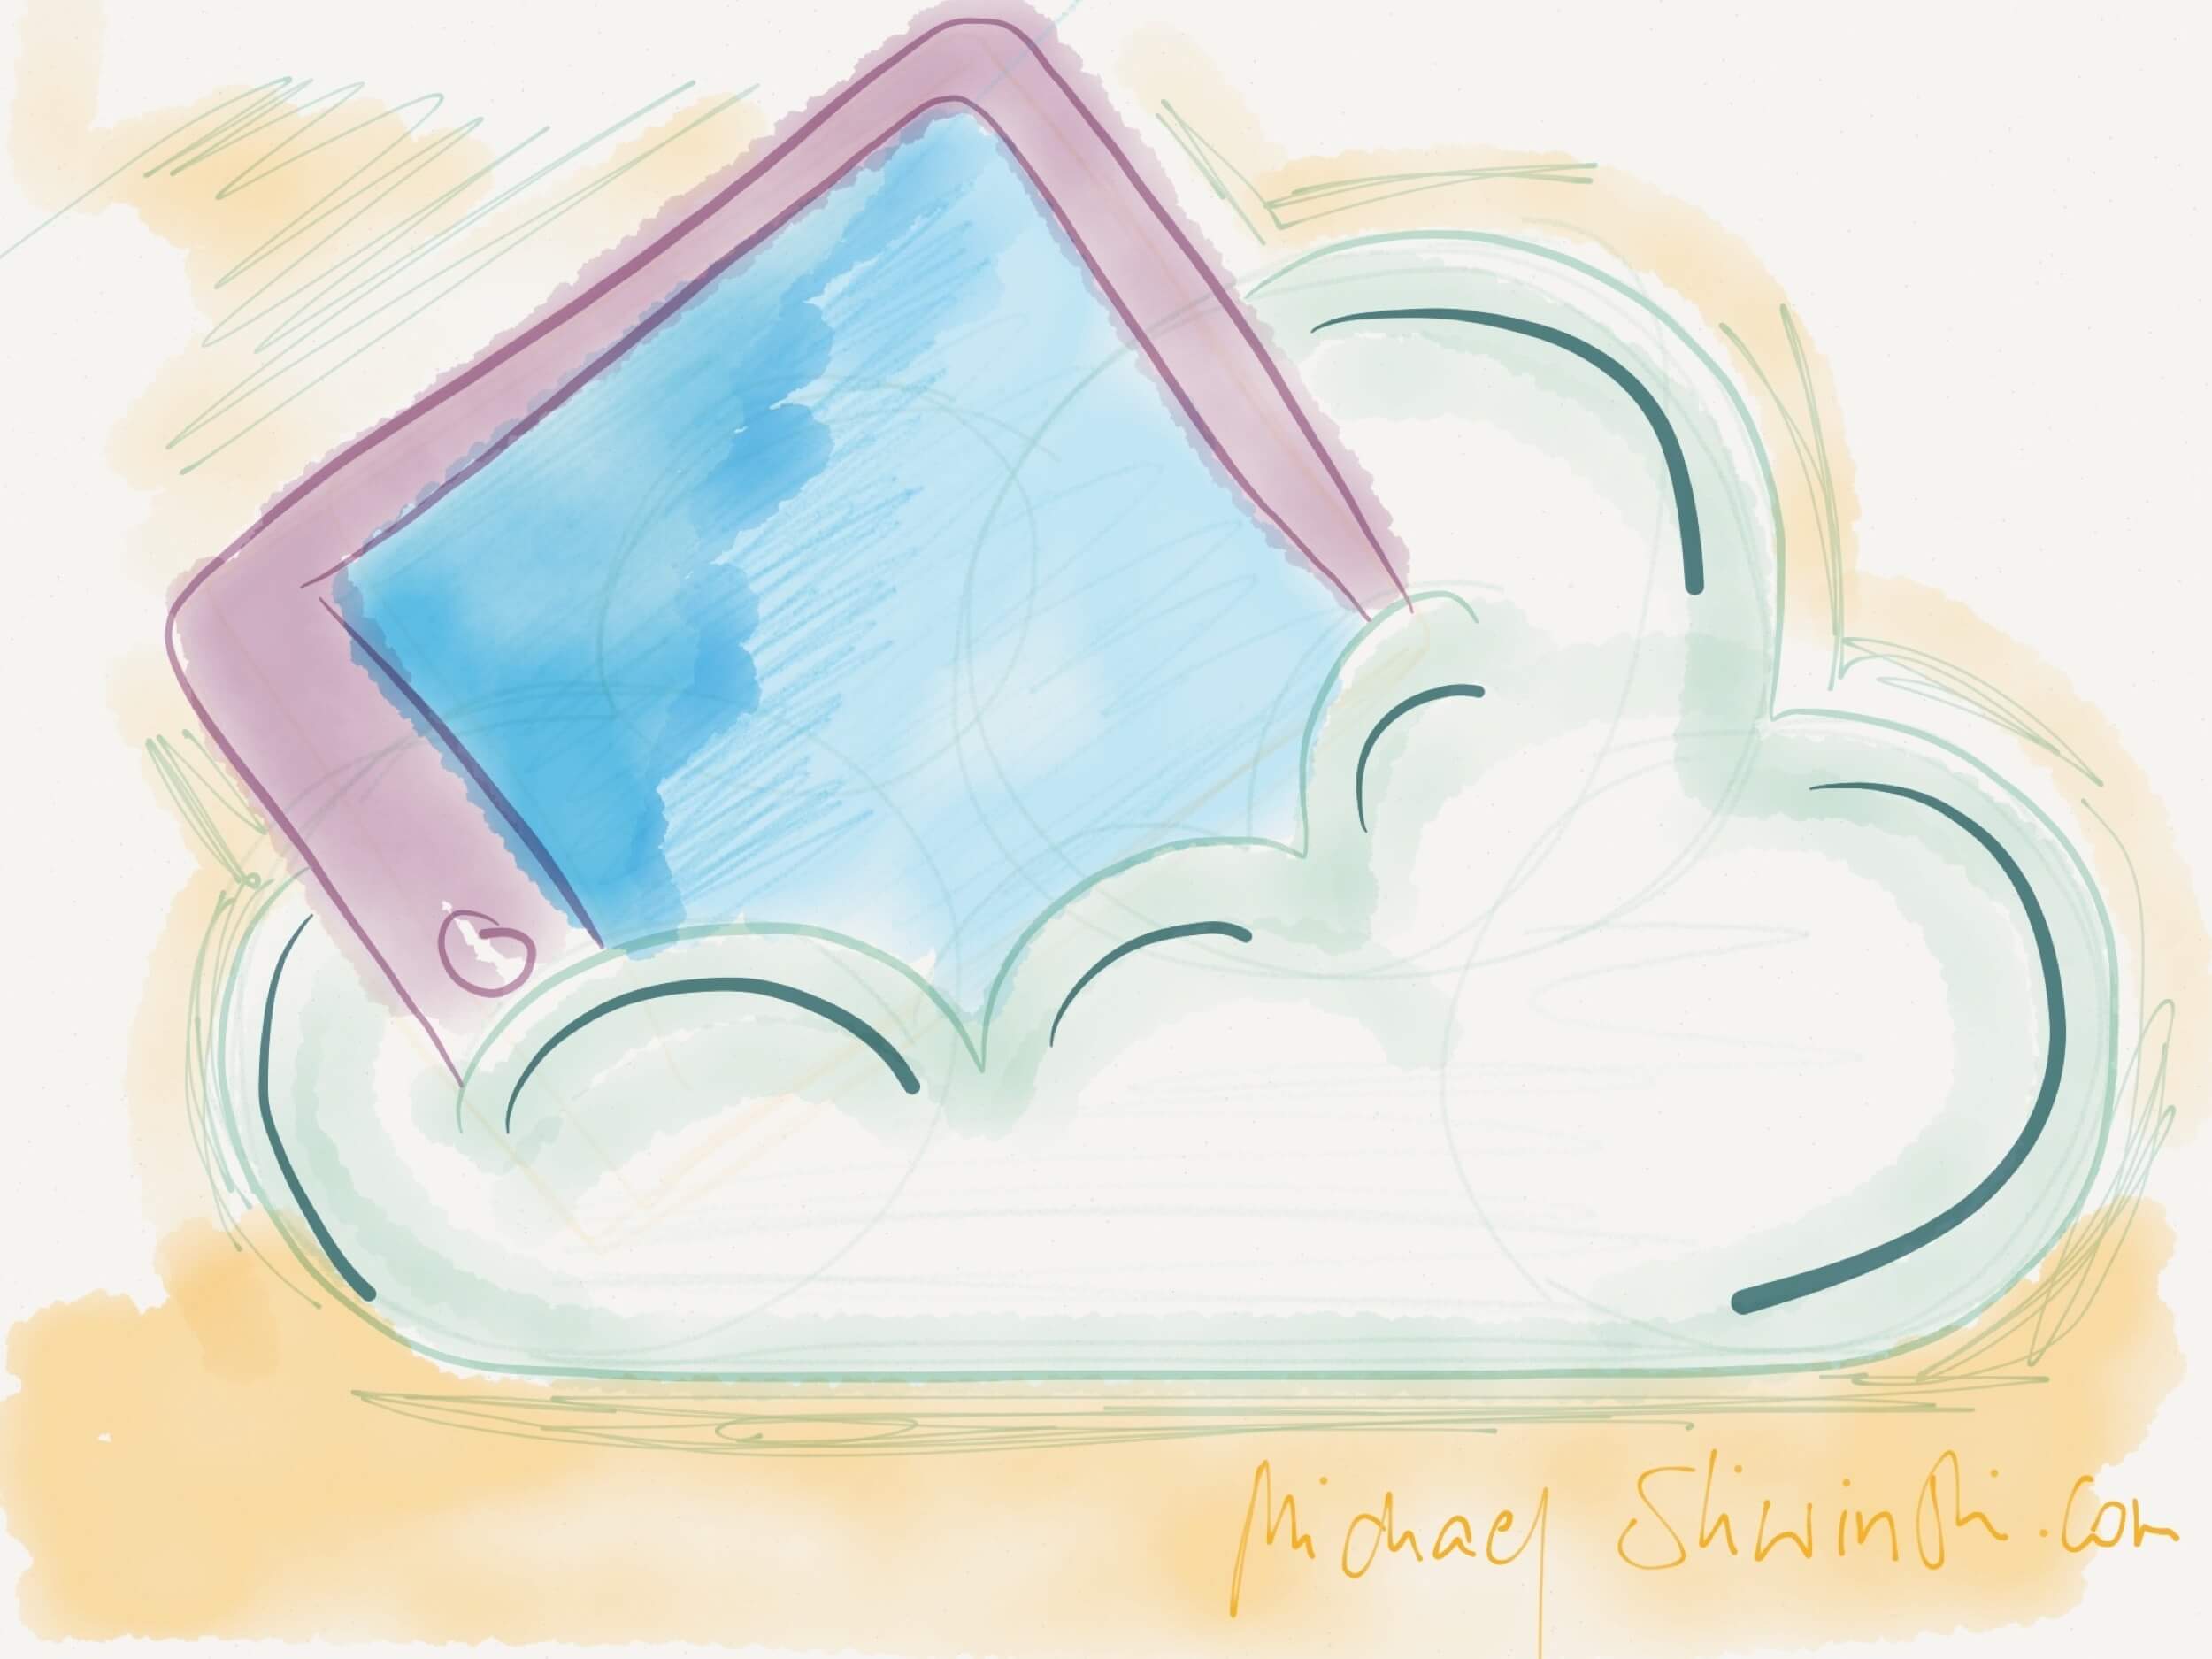 Part 18 - My life in the cloud thanks to the iPad